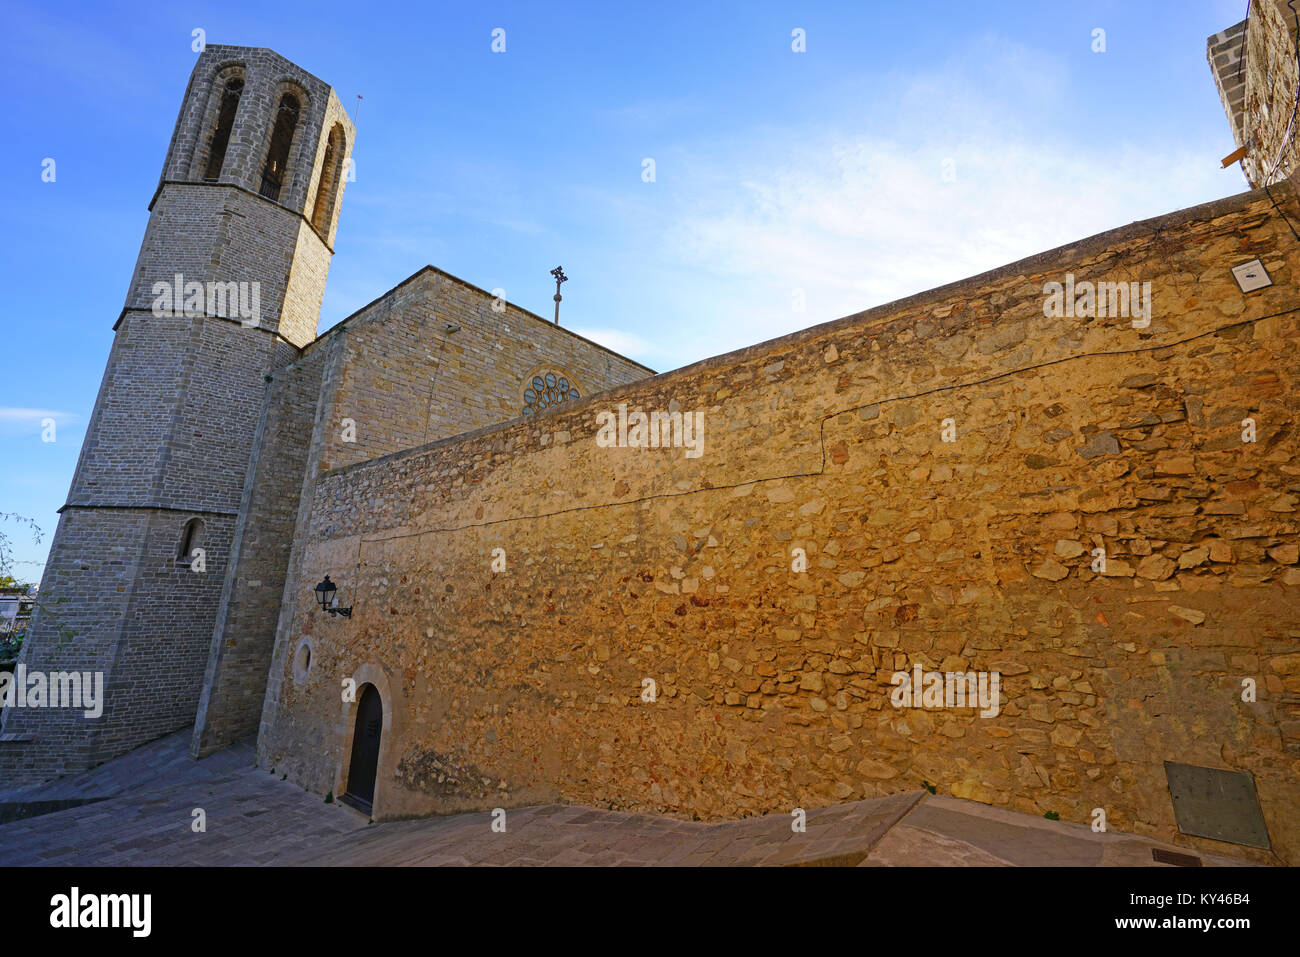 View of the Monastery of Pedralbes, a Gothic monastery in Barcelona, Catalonia, Spain. It is now a museum. Stock Photo